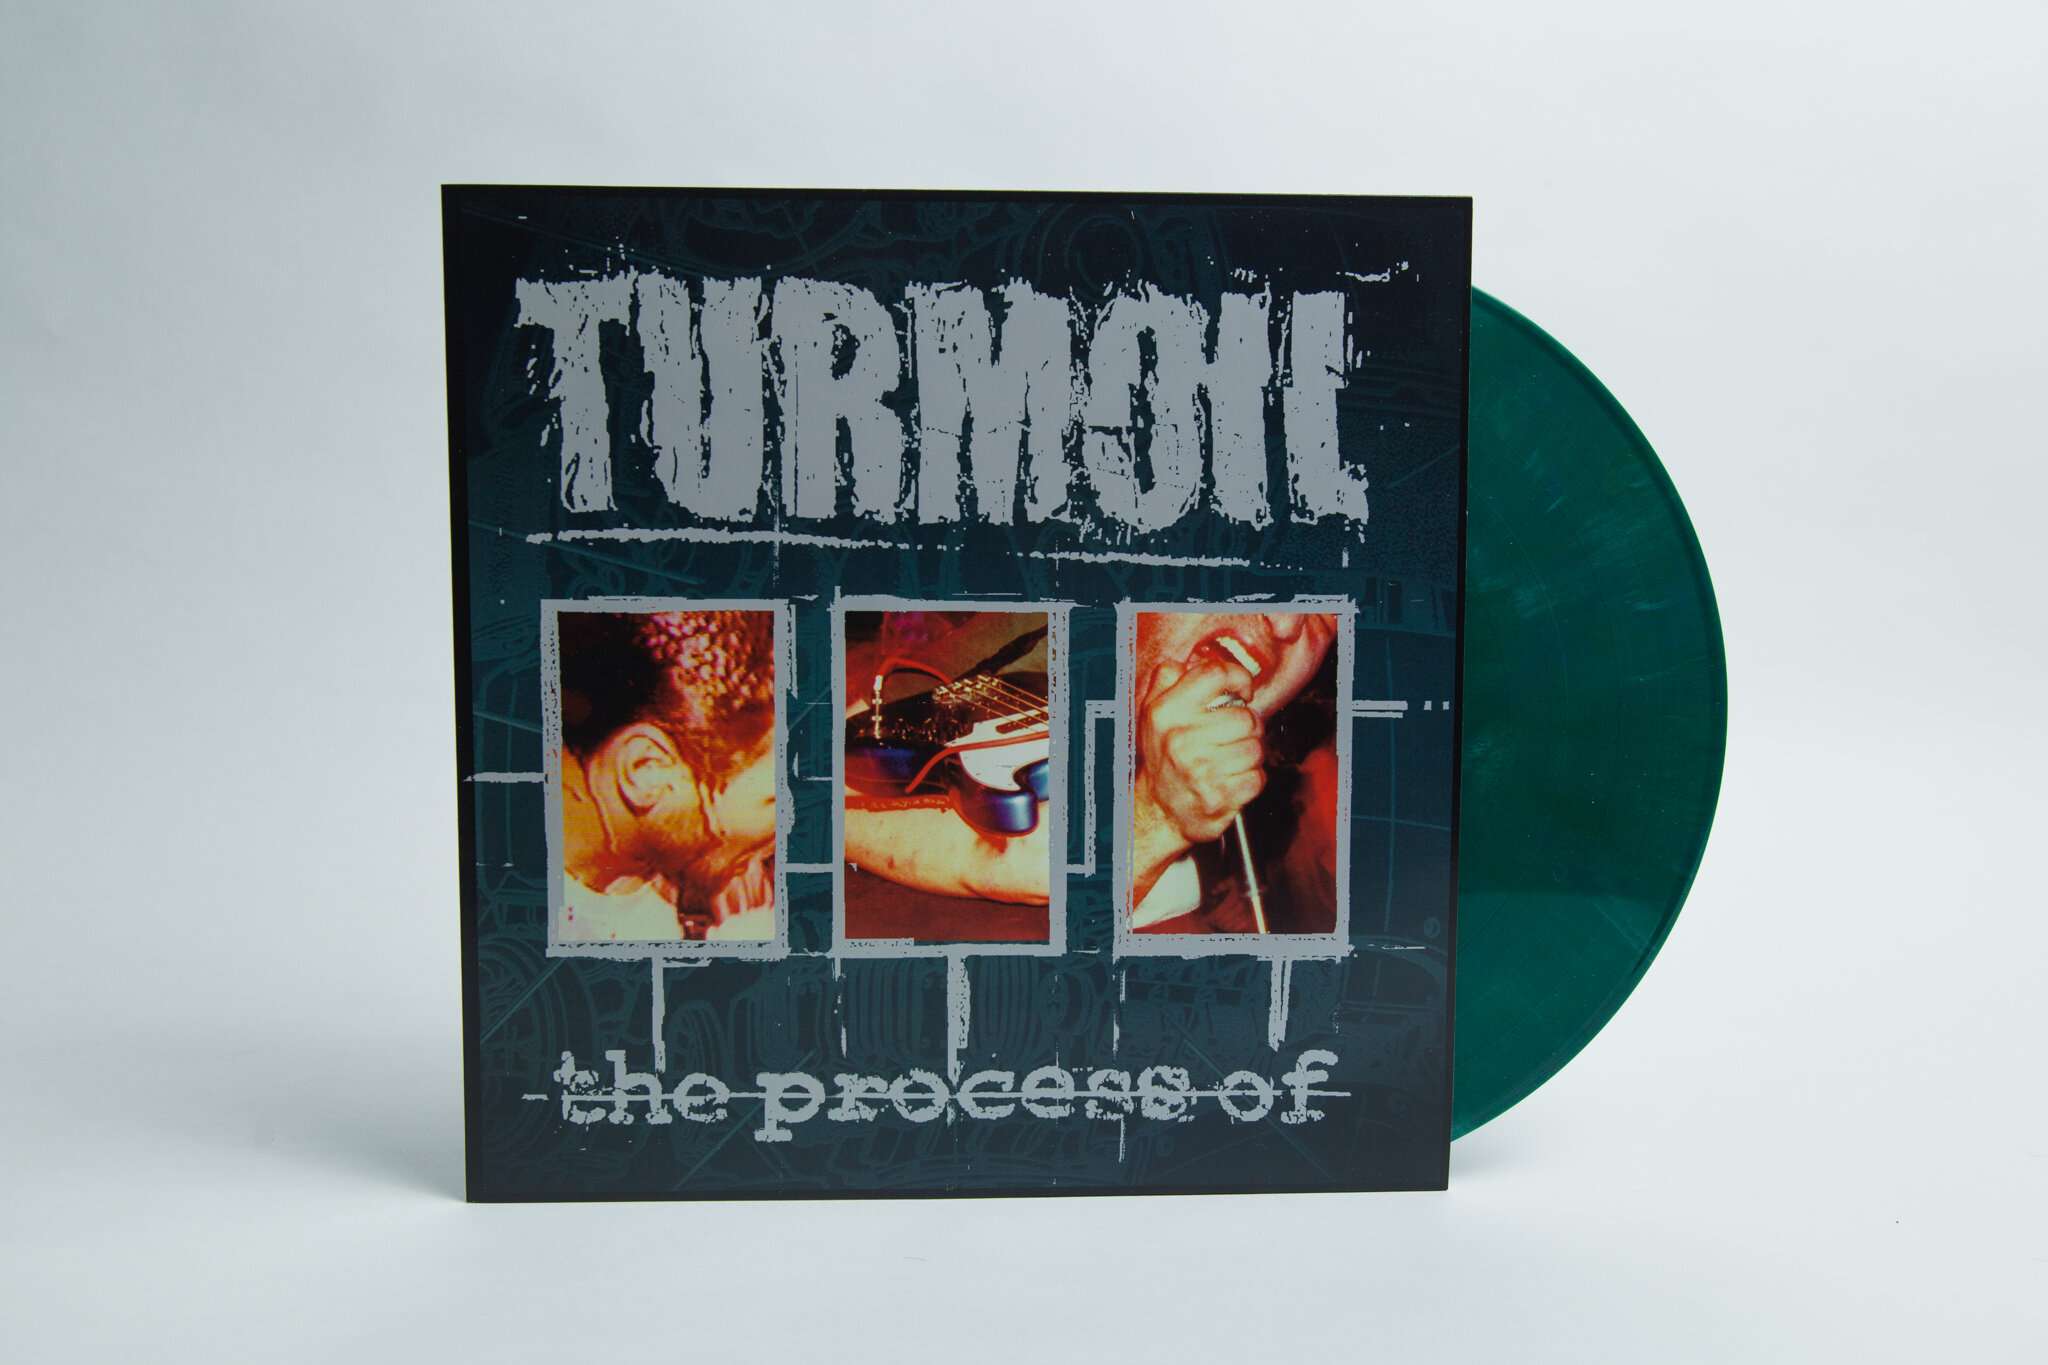  Re-created and updated the record cover and layout for the vinyl reissue of this seminal album 